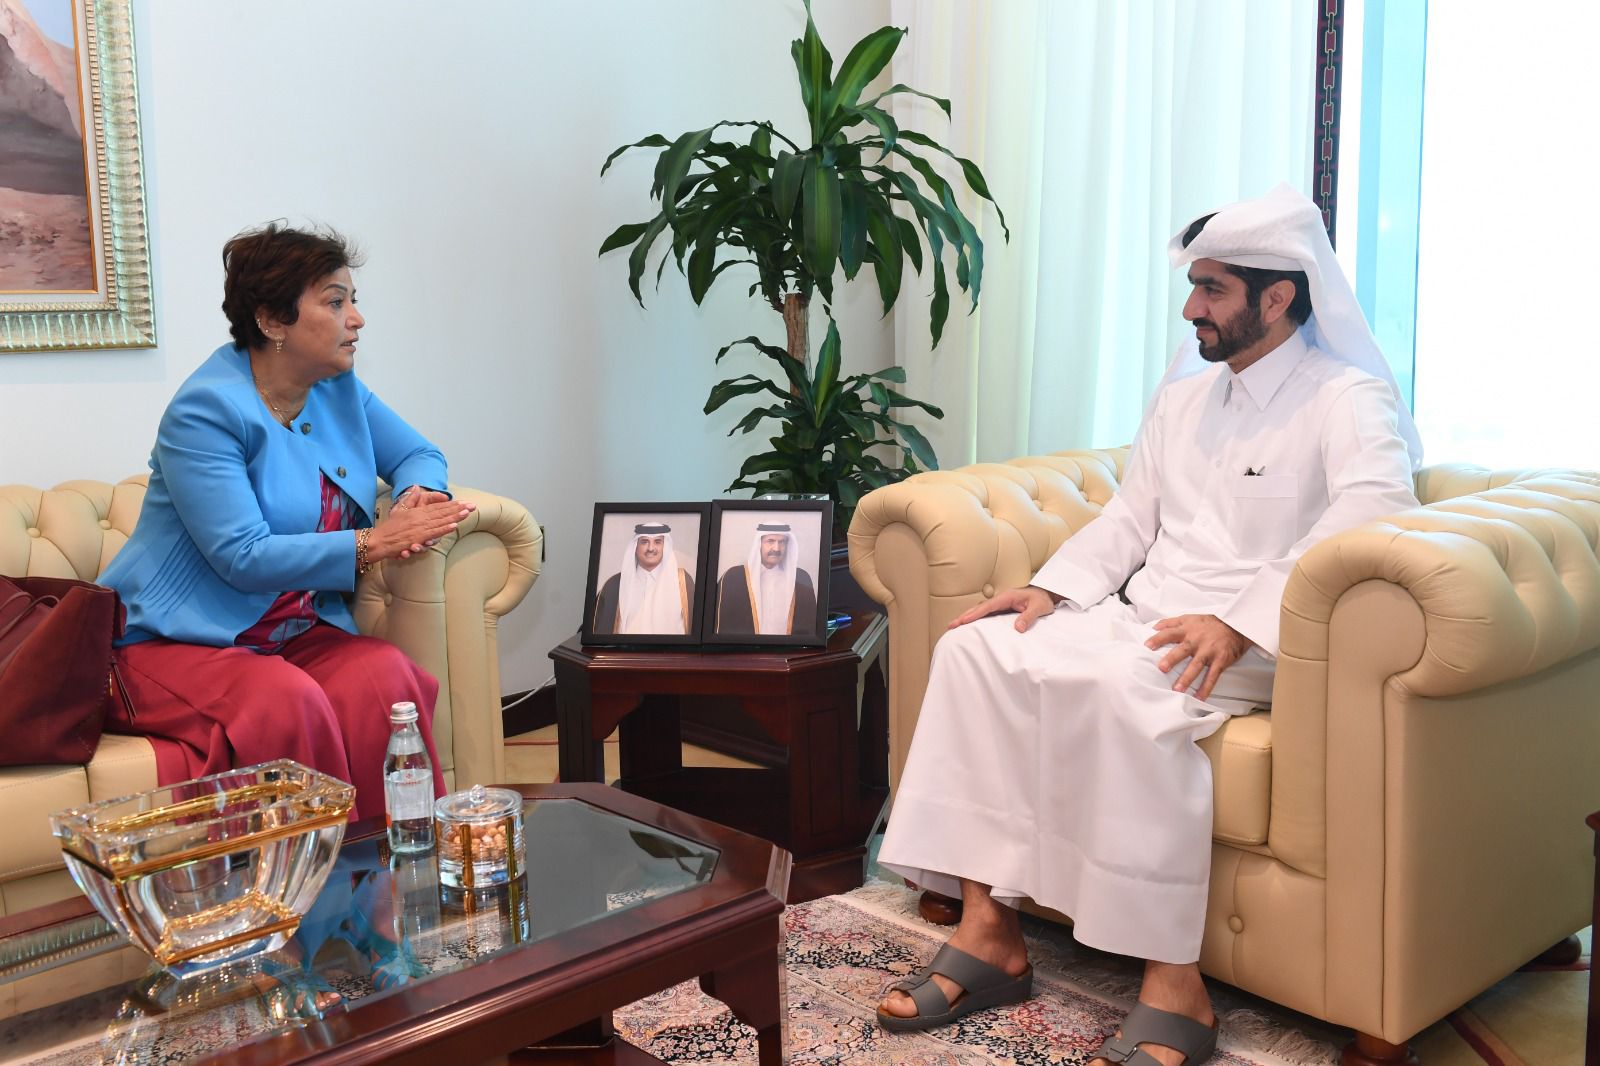 Director of Arab Affairs Department at Ministry of Foreign Affairs Meets UN Deputy Special Envoy for Syria